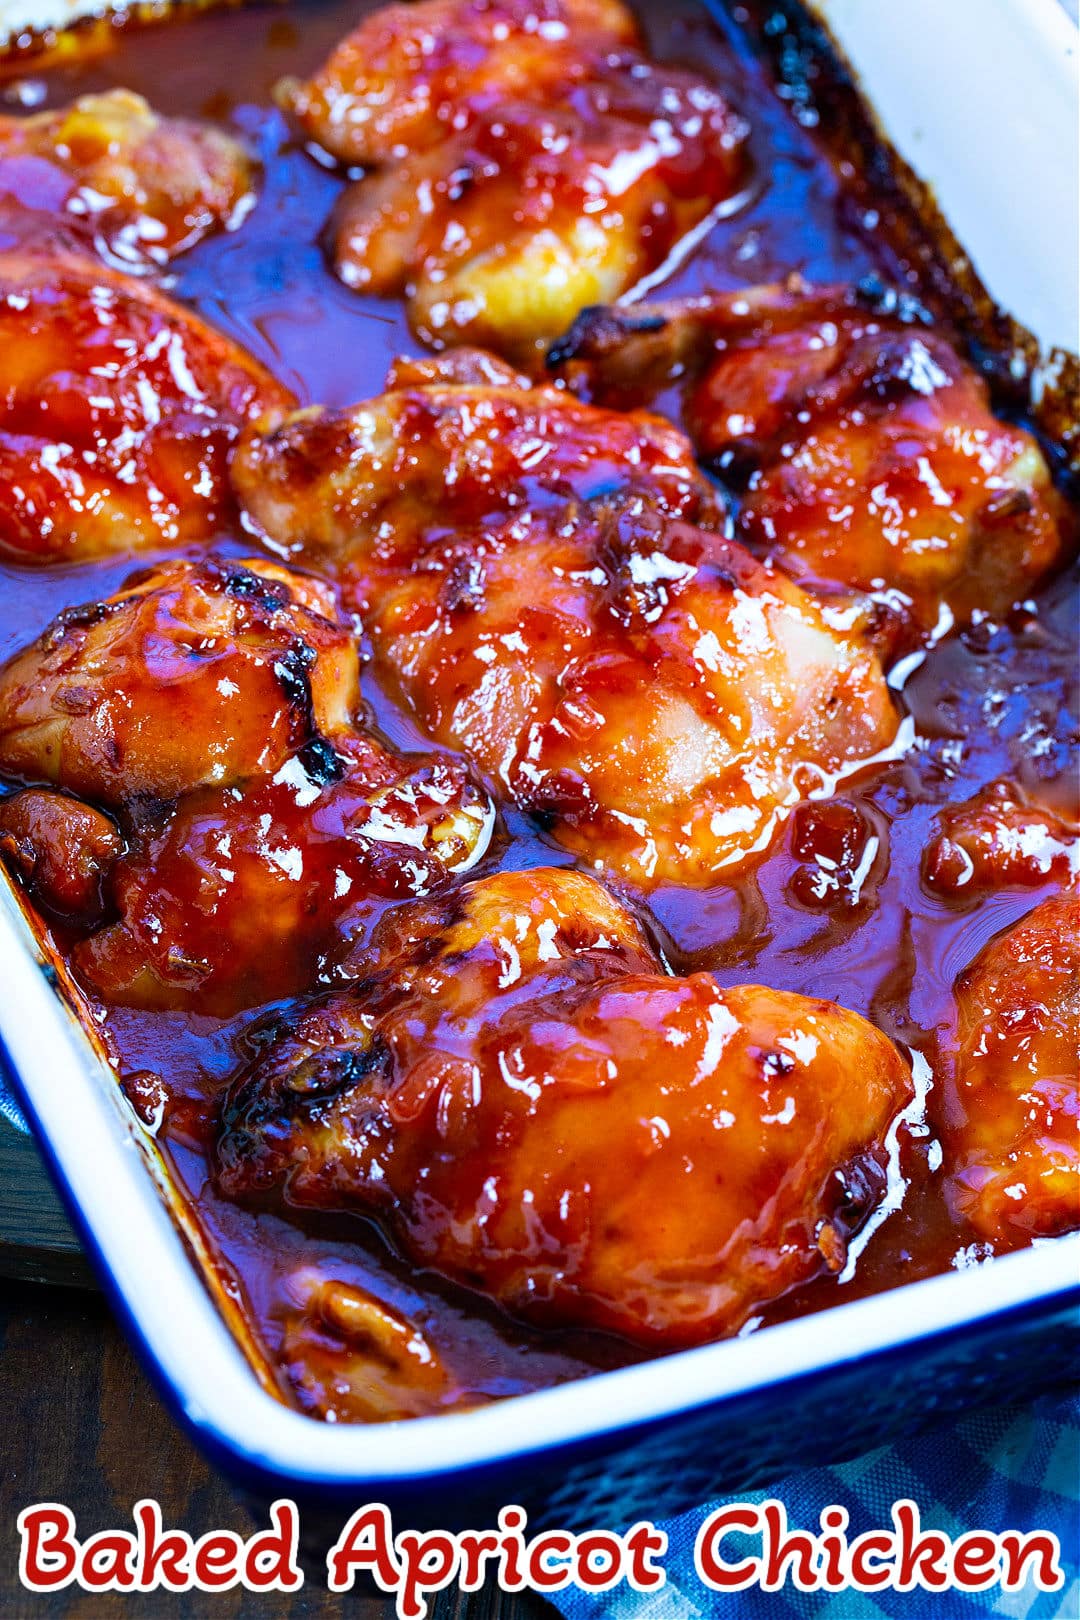 Baked Apricot Chicken in a baking dish.